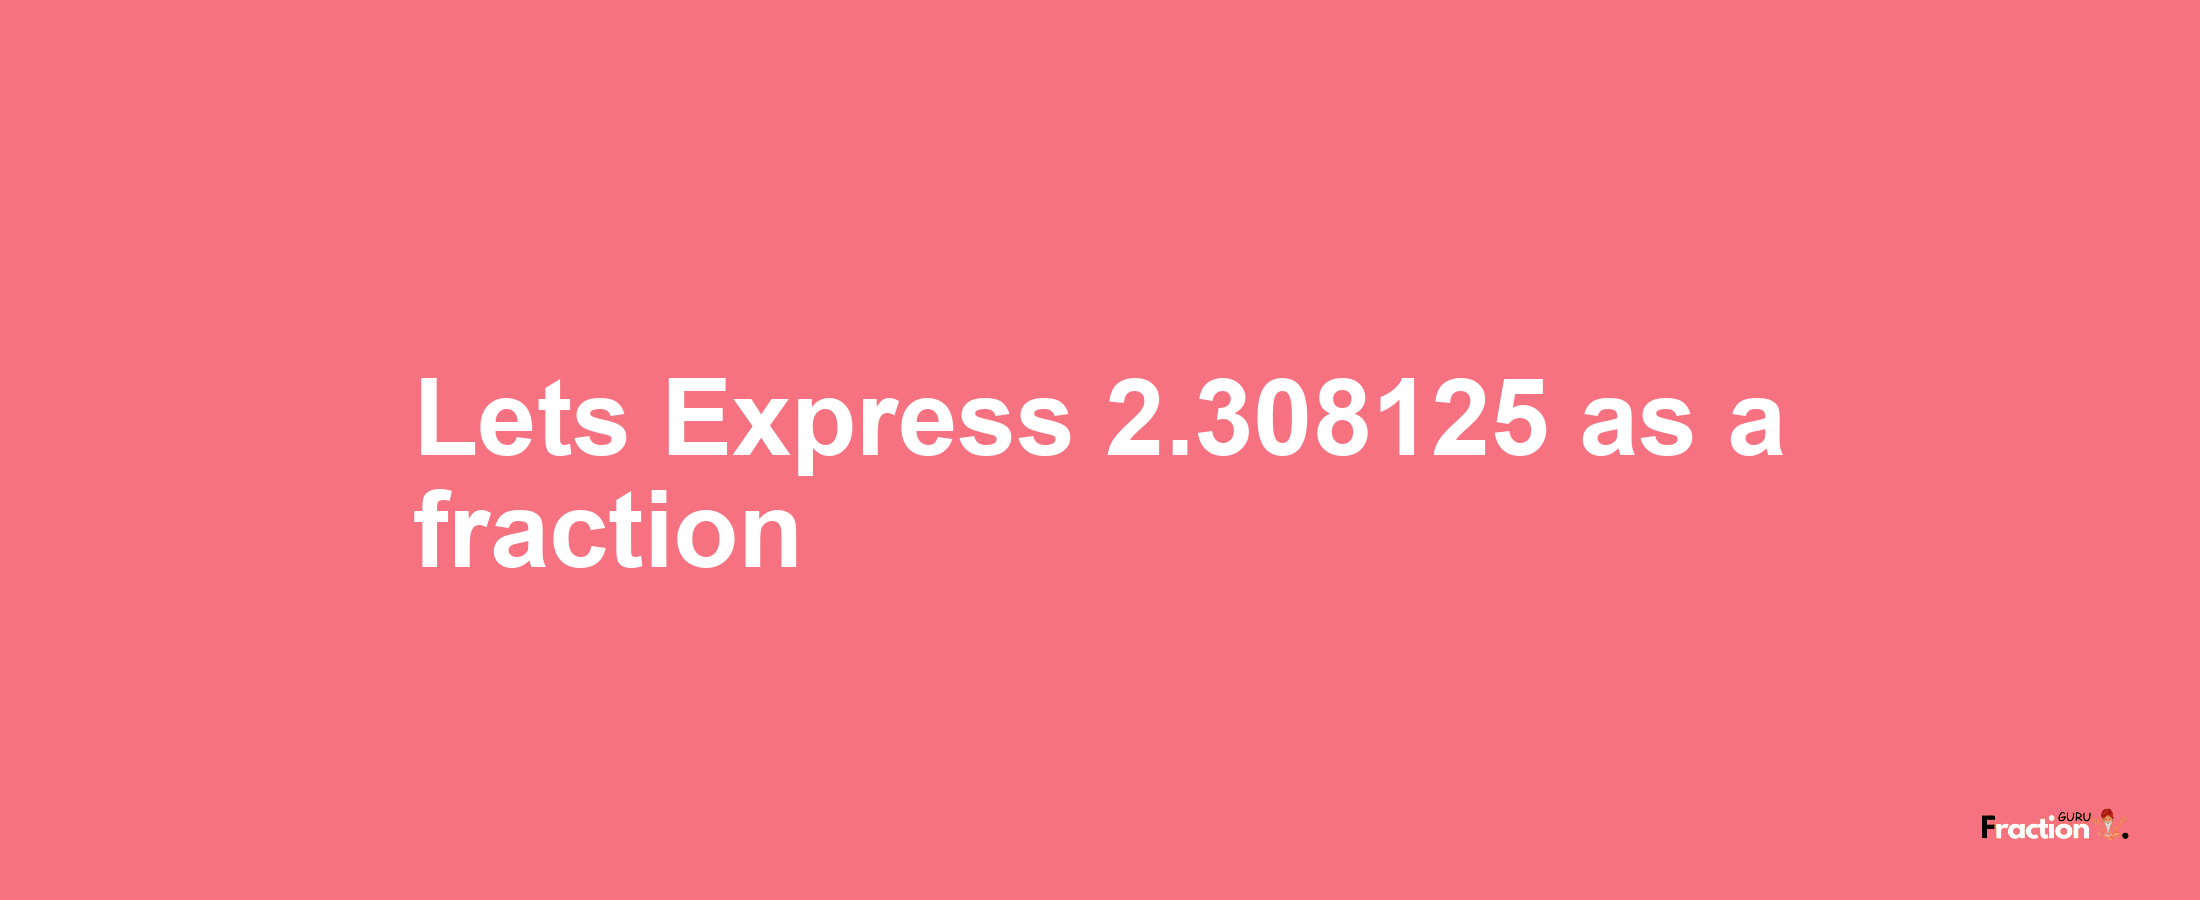 Lets Express 2.308125 as afraction